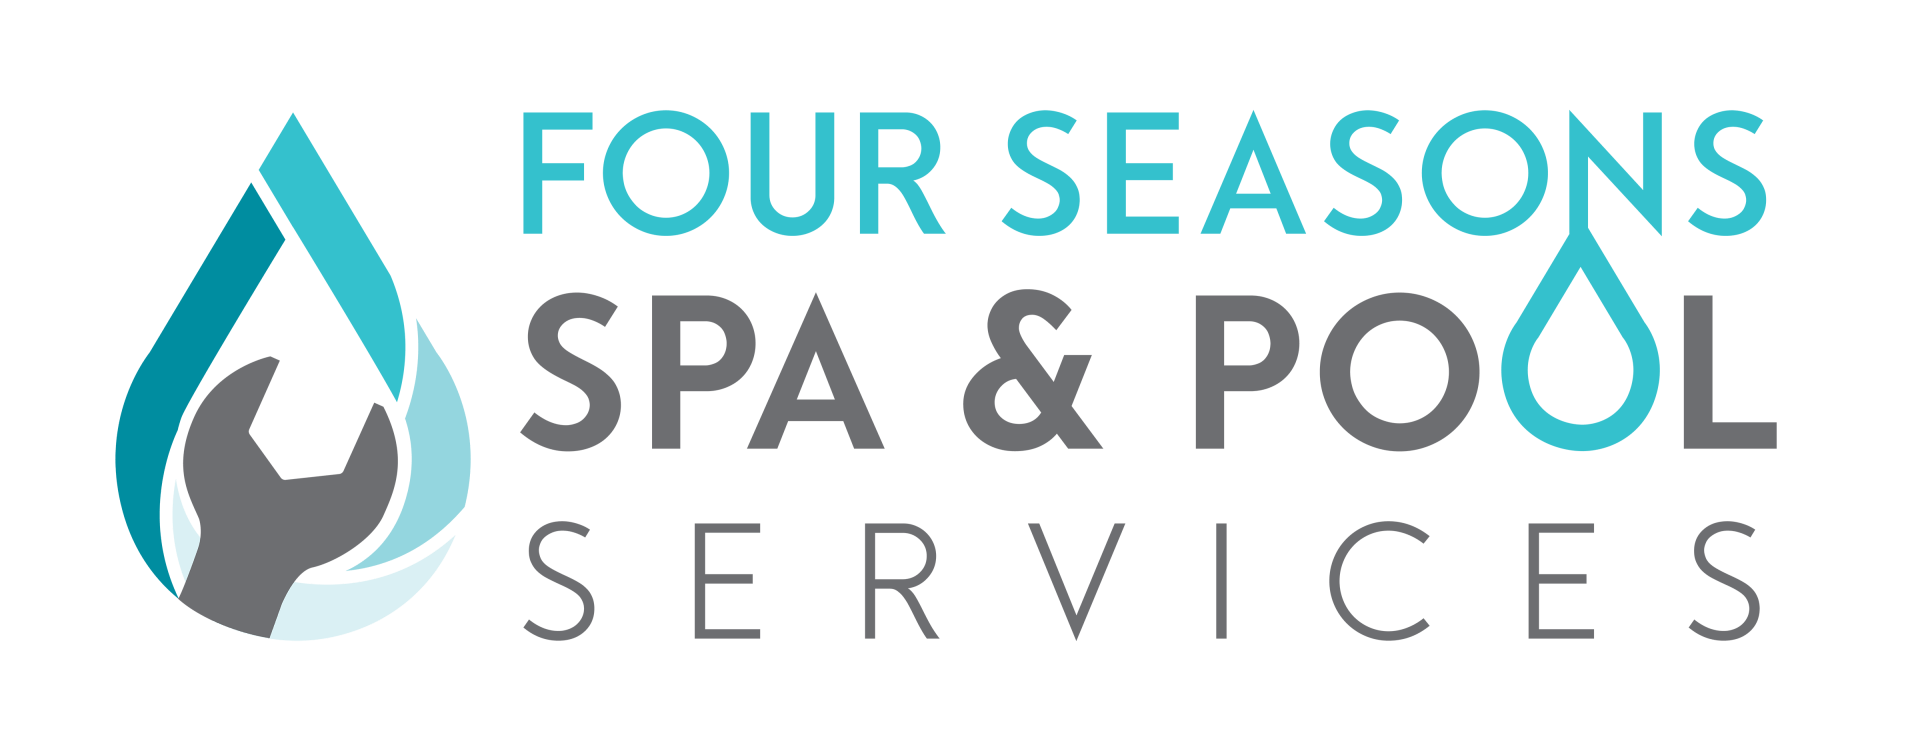 Spa and pool services